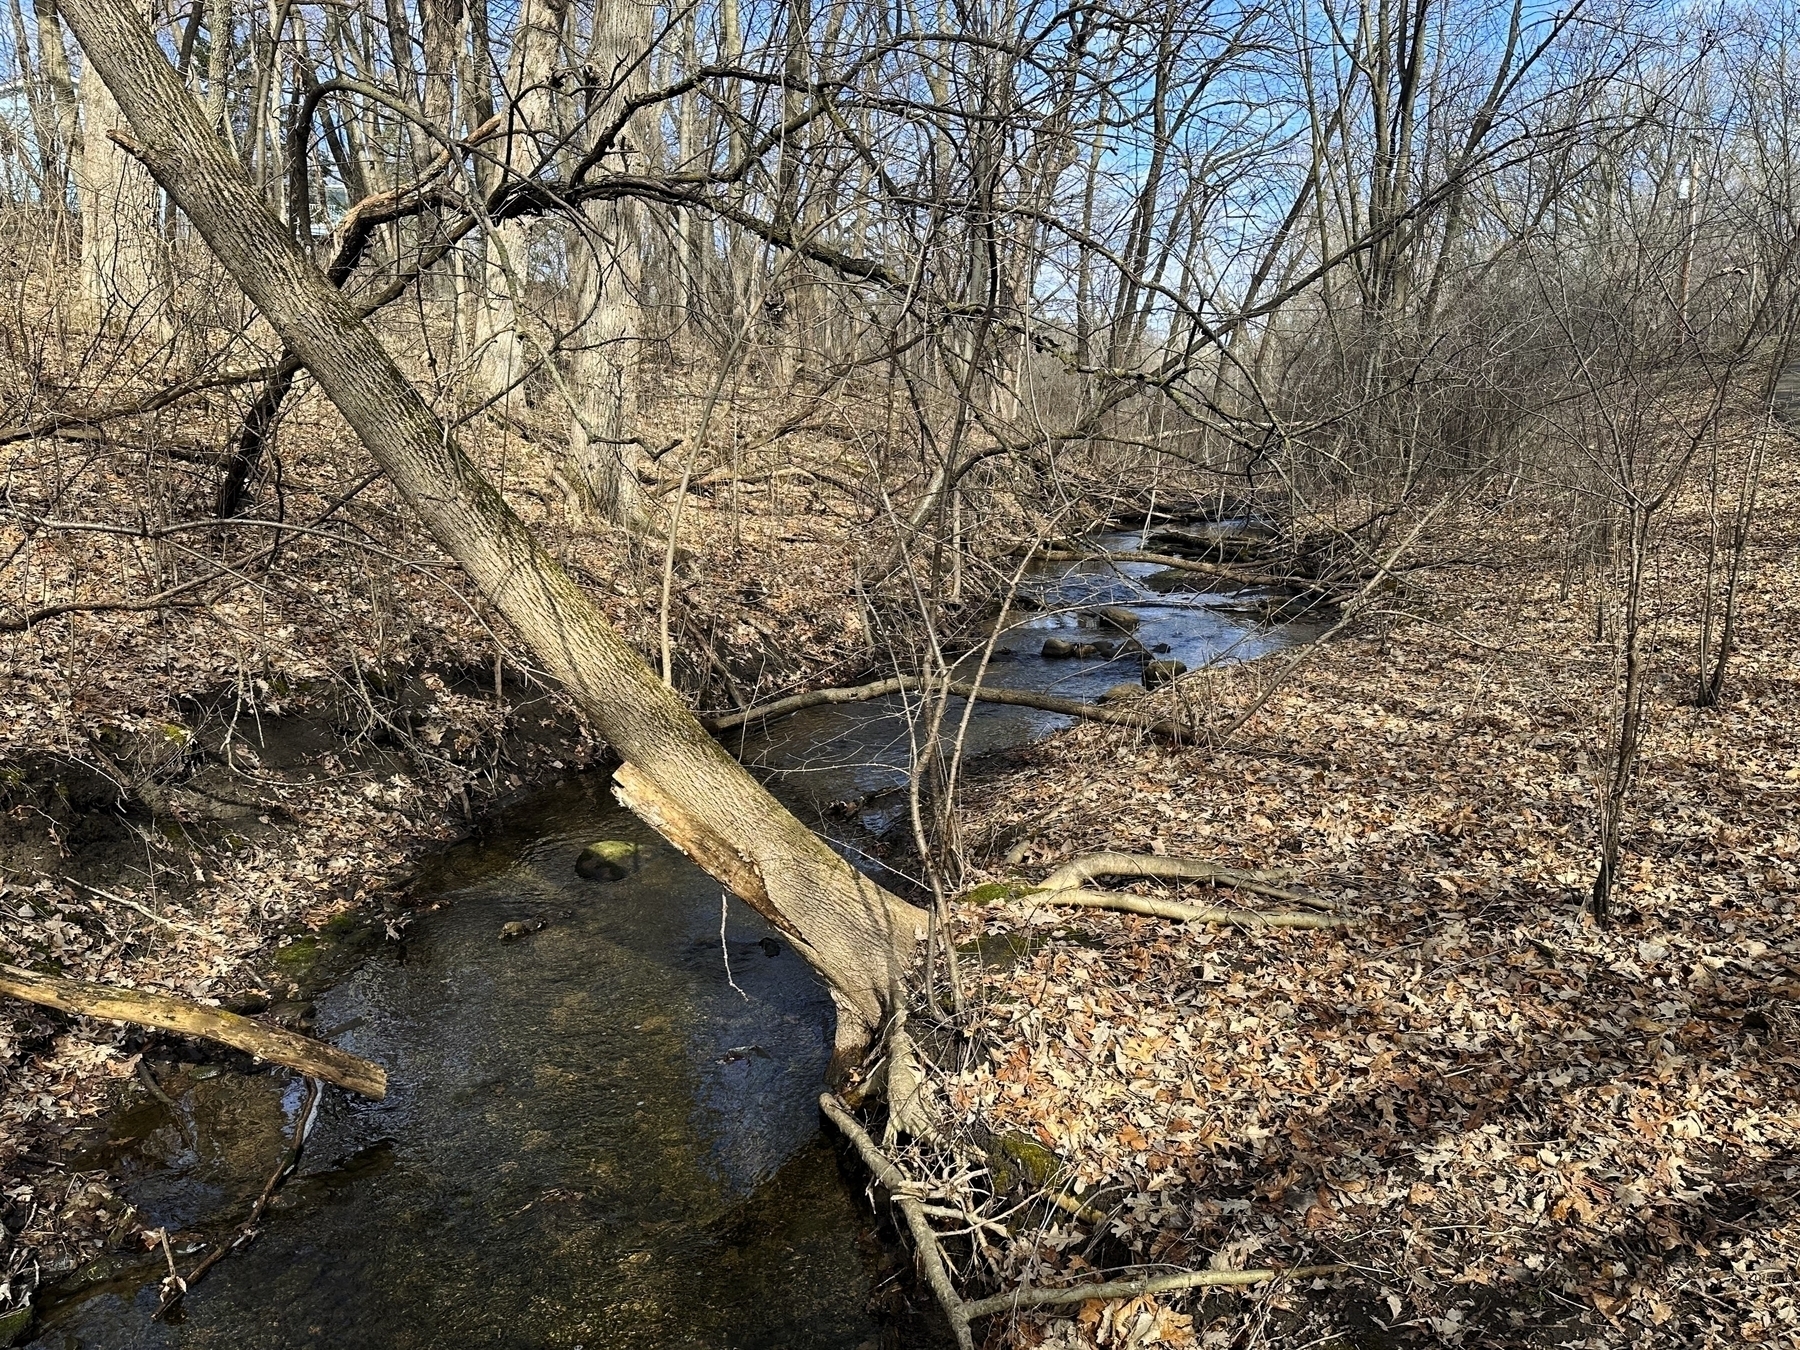 A small stream meanders through a leaf-strewn woodland with bare trees arching over the water, reflecting a clear sky above.